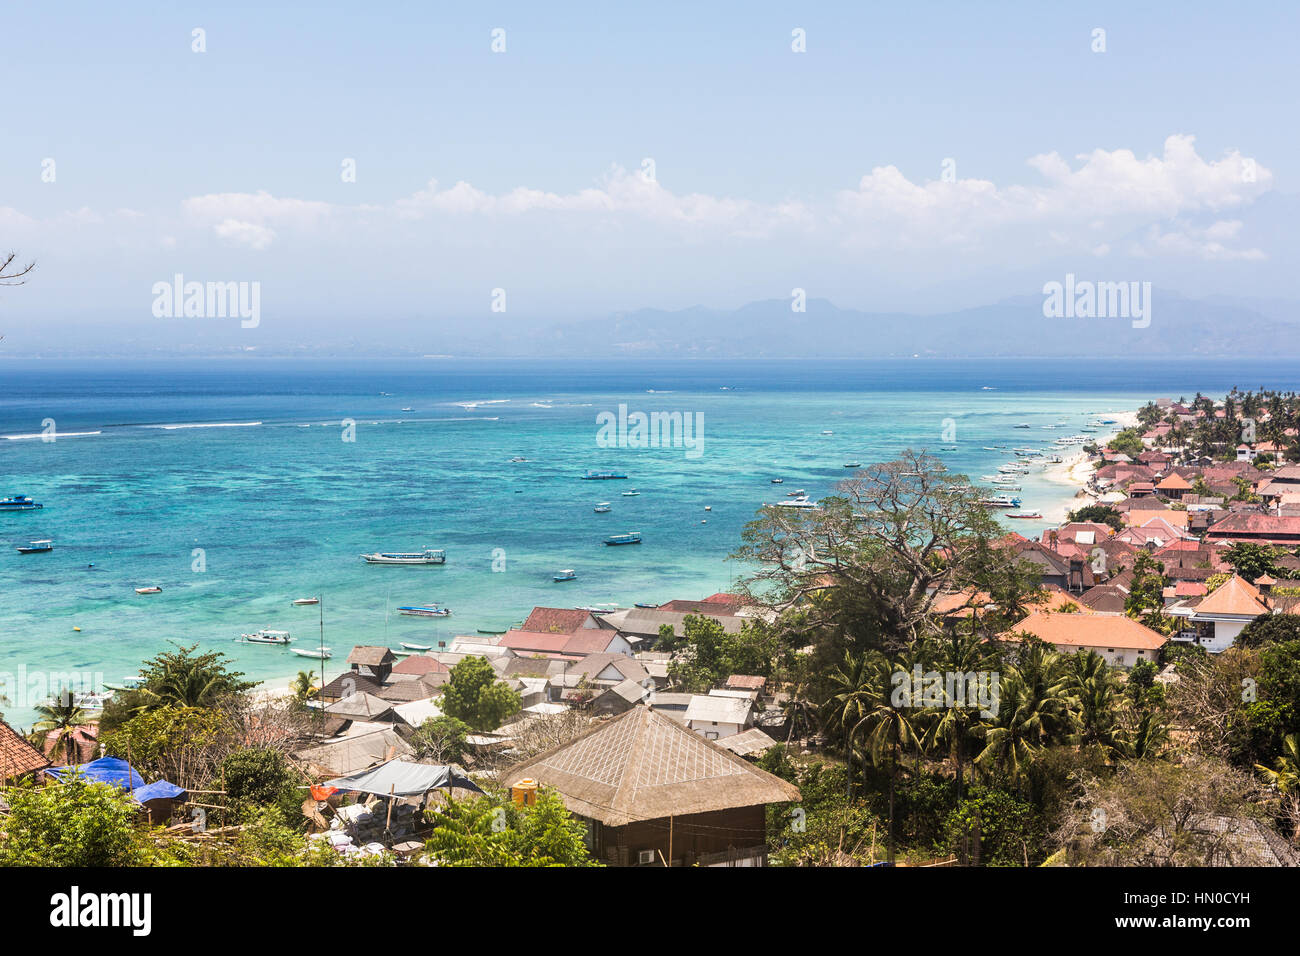 stunning view of Lembongan island from the panorama view point on the small island close to Bali, which is visible in the background, in Indonesia Stock Photo